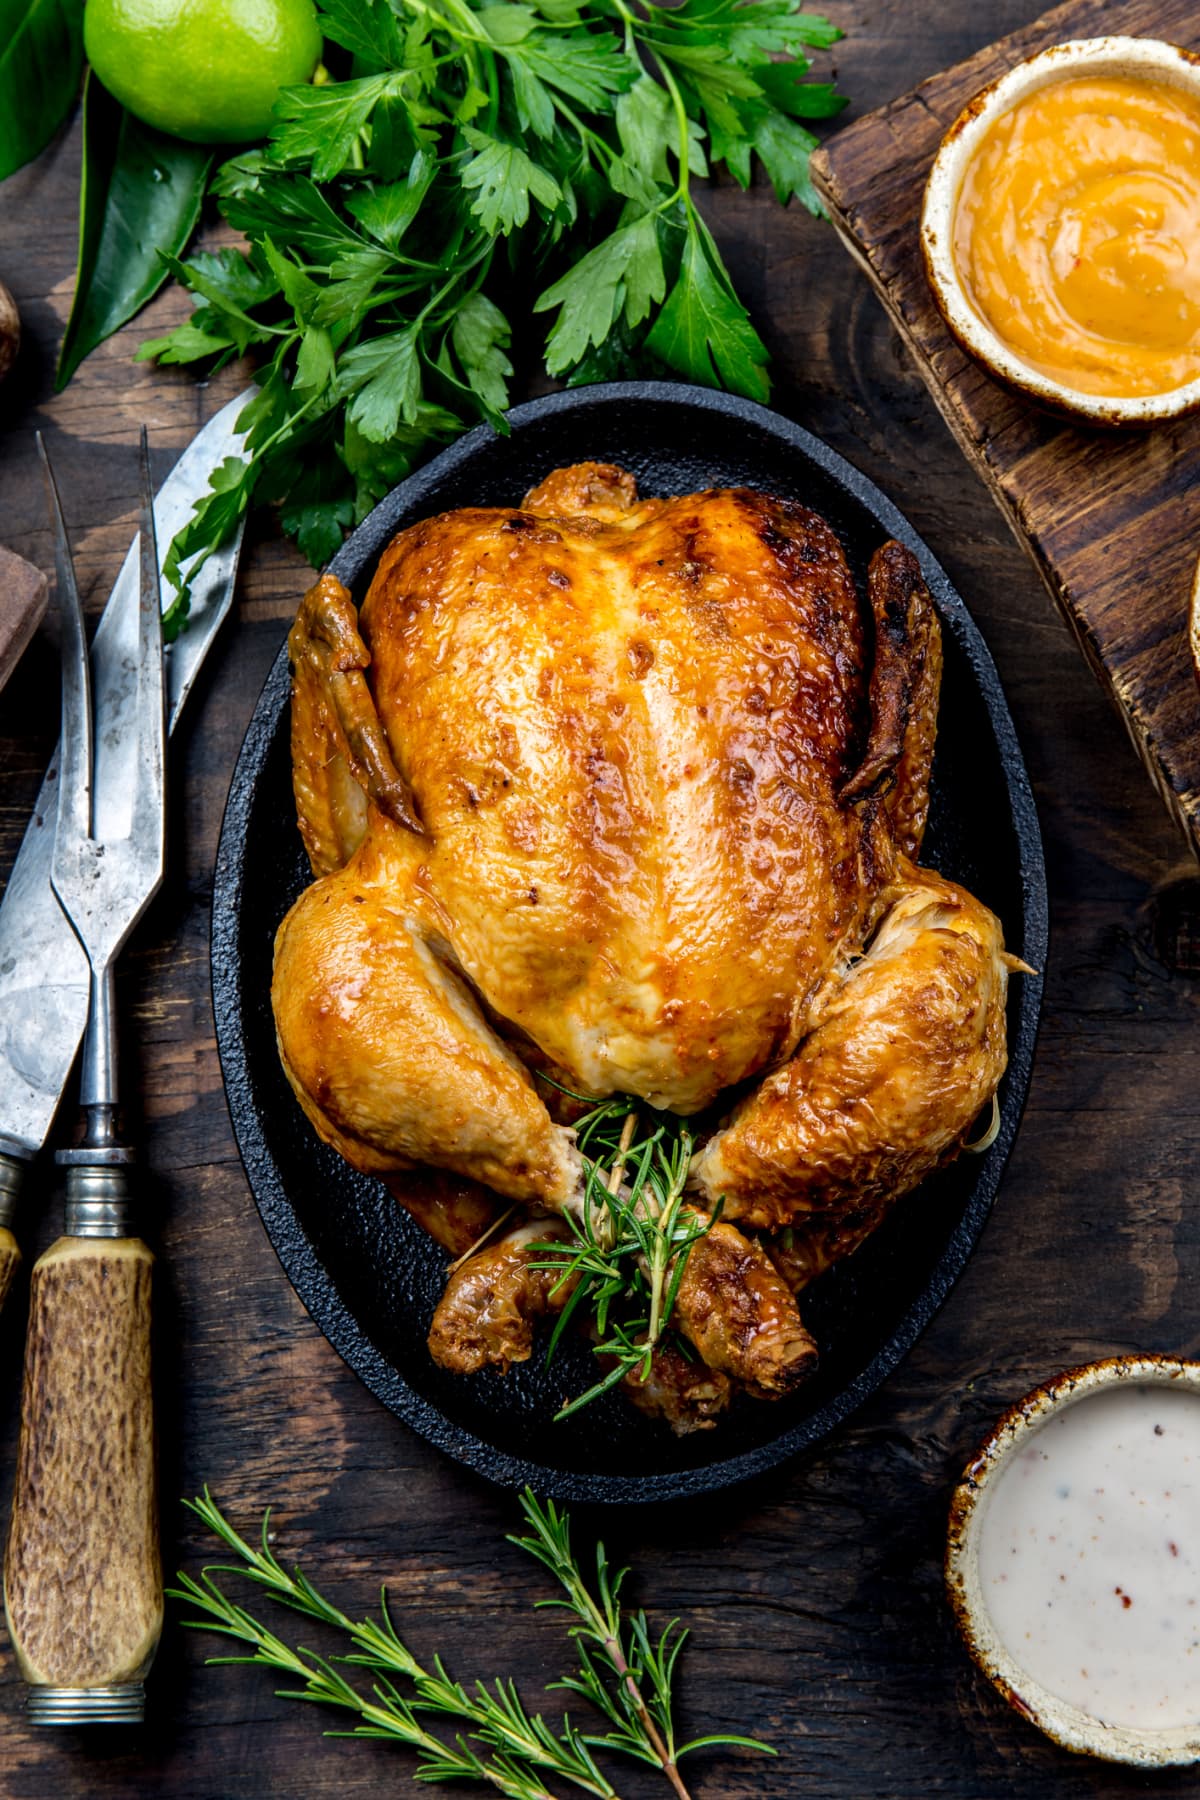 Roasted whole chicken in pot on wooden table